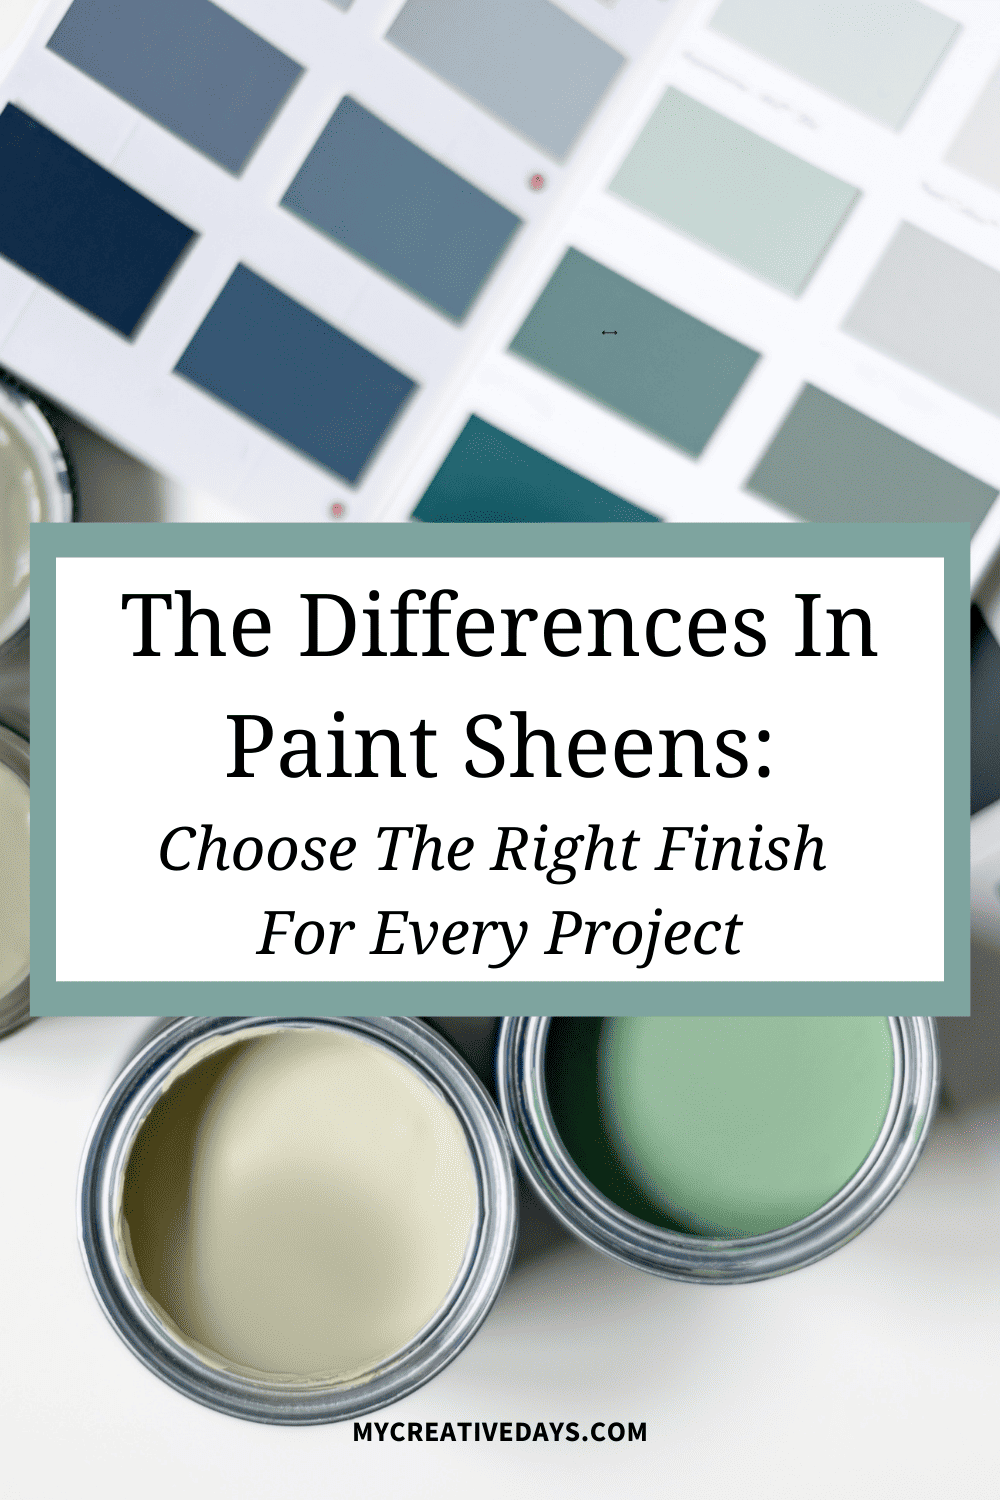 Discover the differences in paint sheens and their unique characteristics in this comprehensive guide. Learn how to select the perfect finish for each room, whether it's a cozy matte for bedrooms or a dazzling gloss for accent features. Make sure you are choosing the perfect finish for every project.